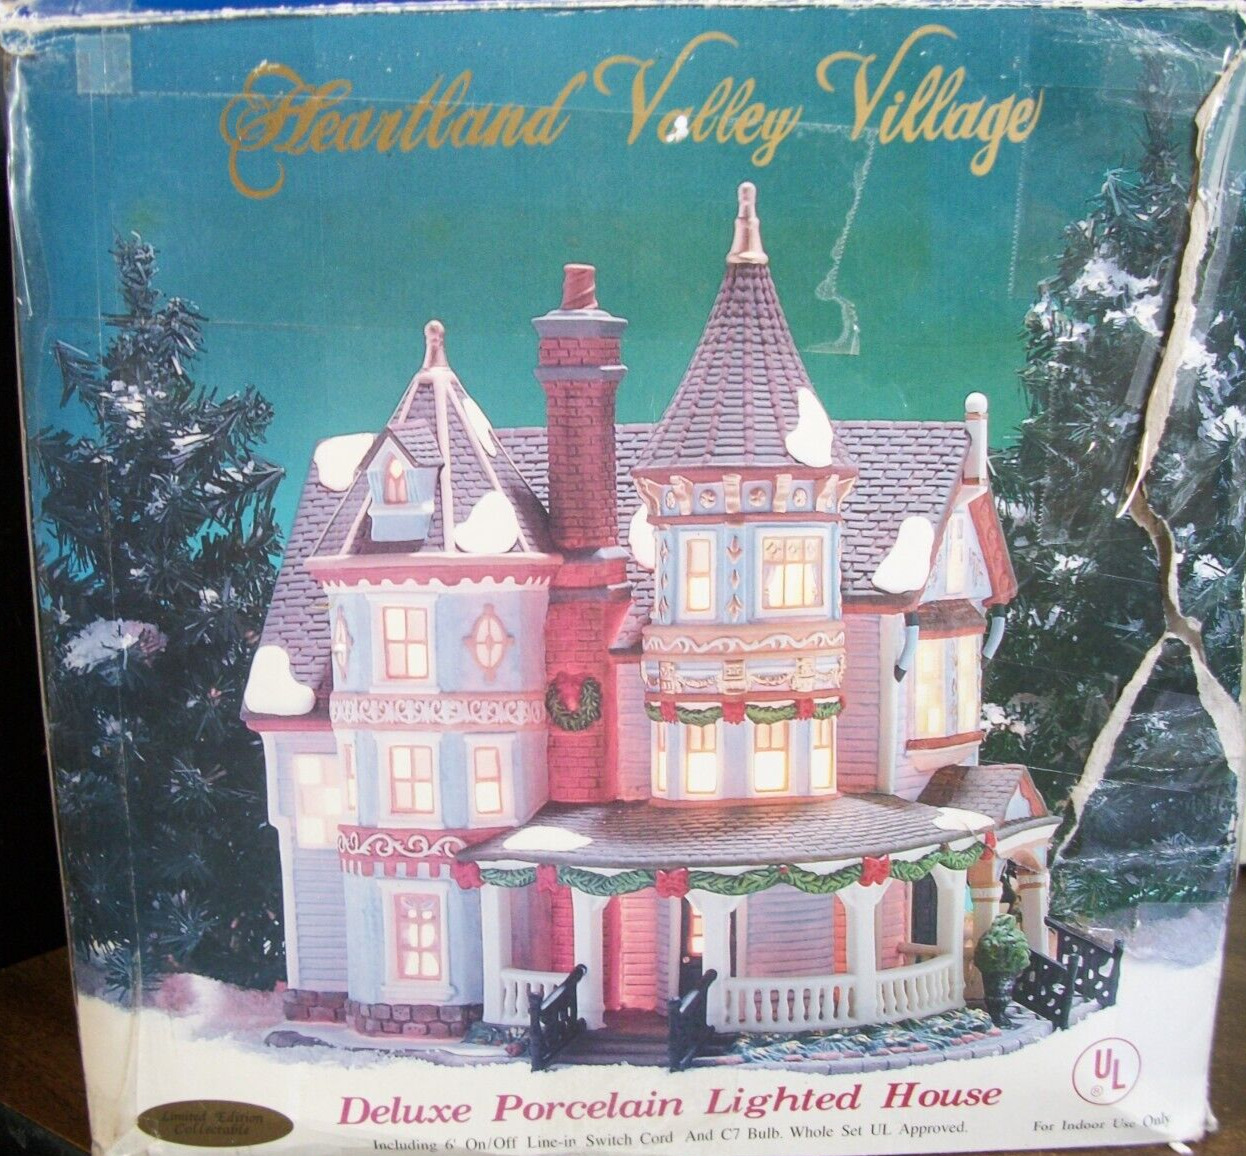 OWell Heartland Valley Village Deluxe Porcelain Lighted House Limited Ed As Is